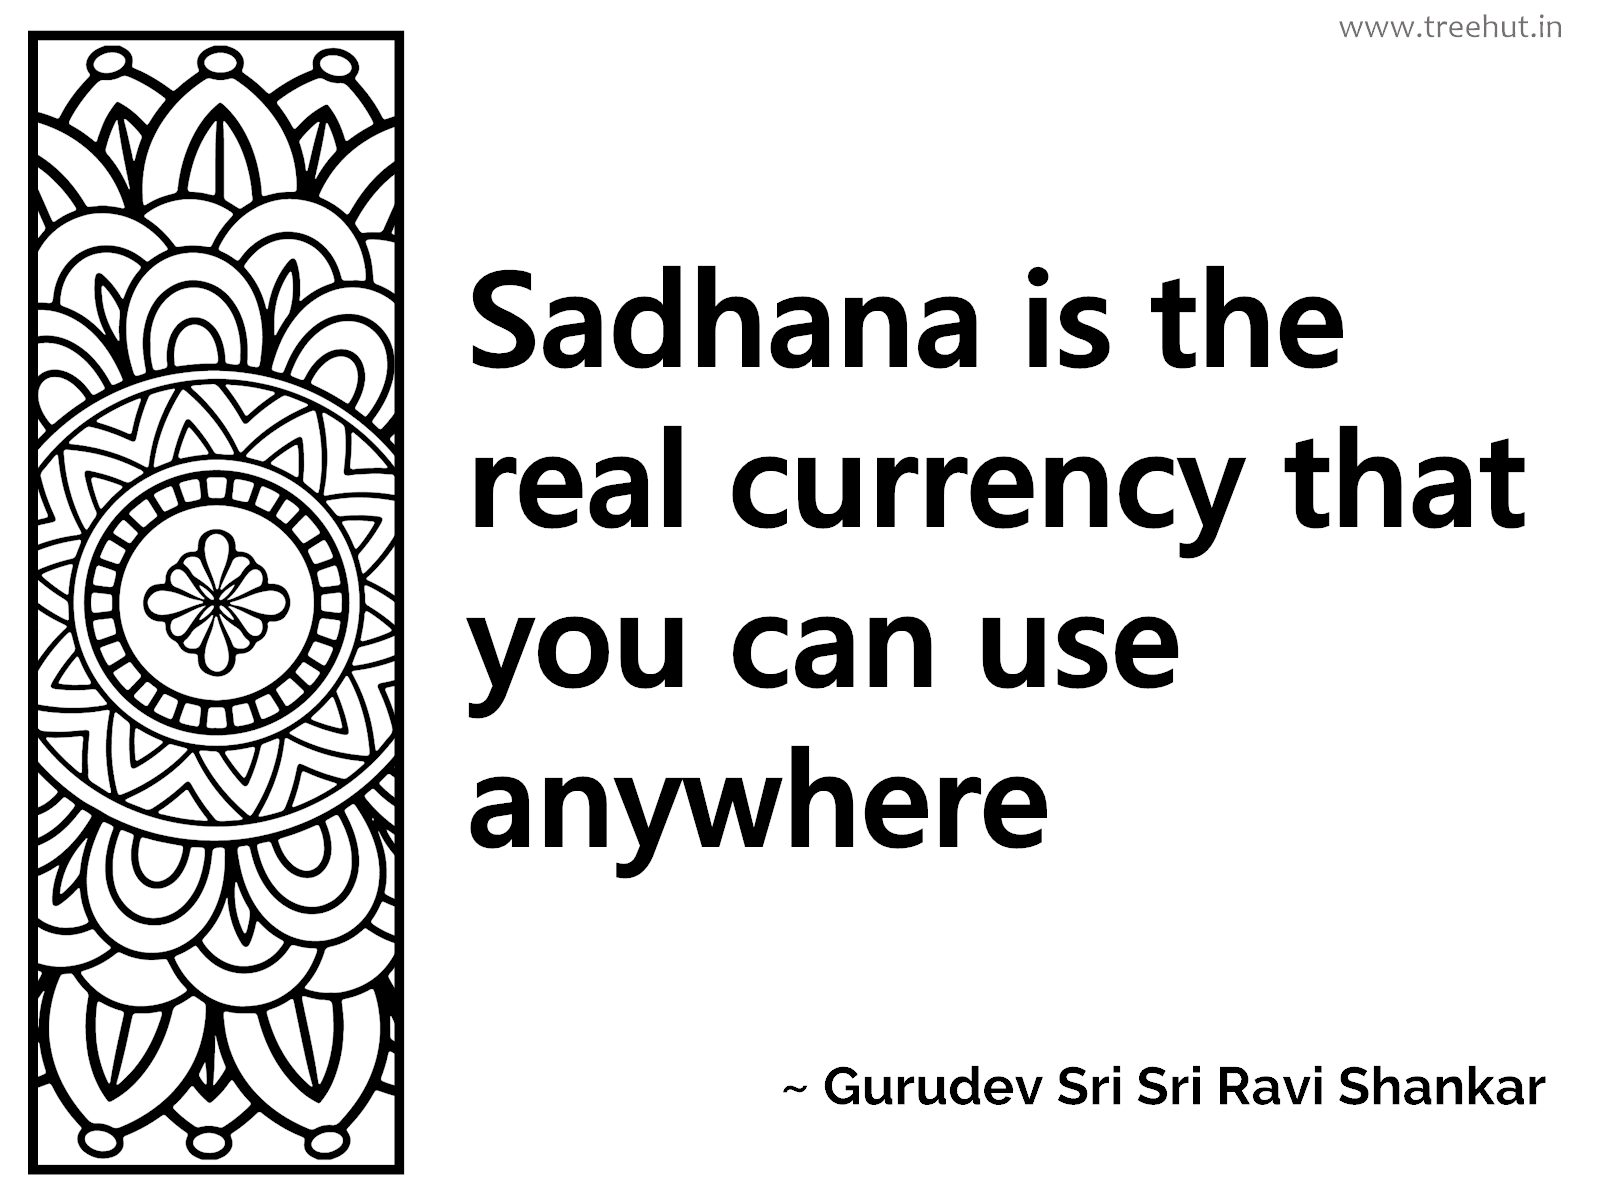 Sadhana is the real currency that you can use anywhere Inspirational Quote by Gurudev Sri Sri Ravi Shankar, coloring pages